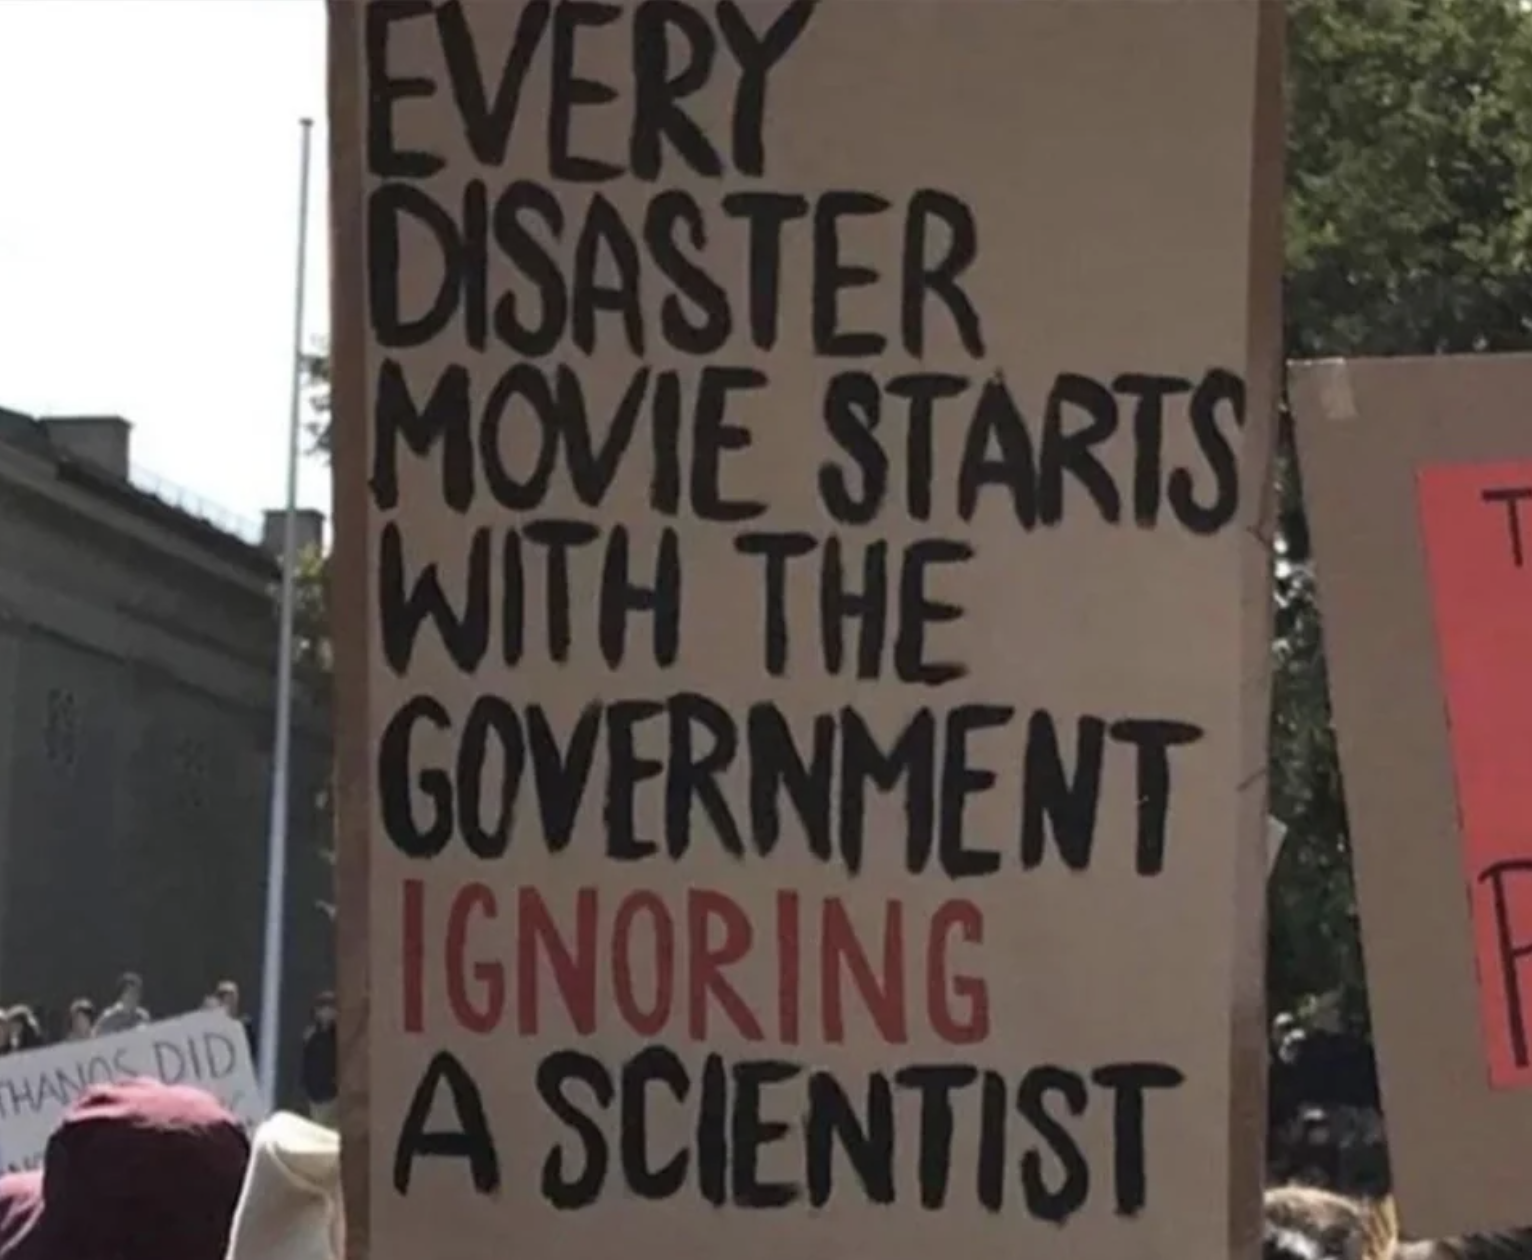 every disaster movie starts with the government ignoring a scientist